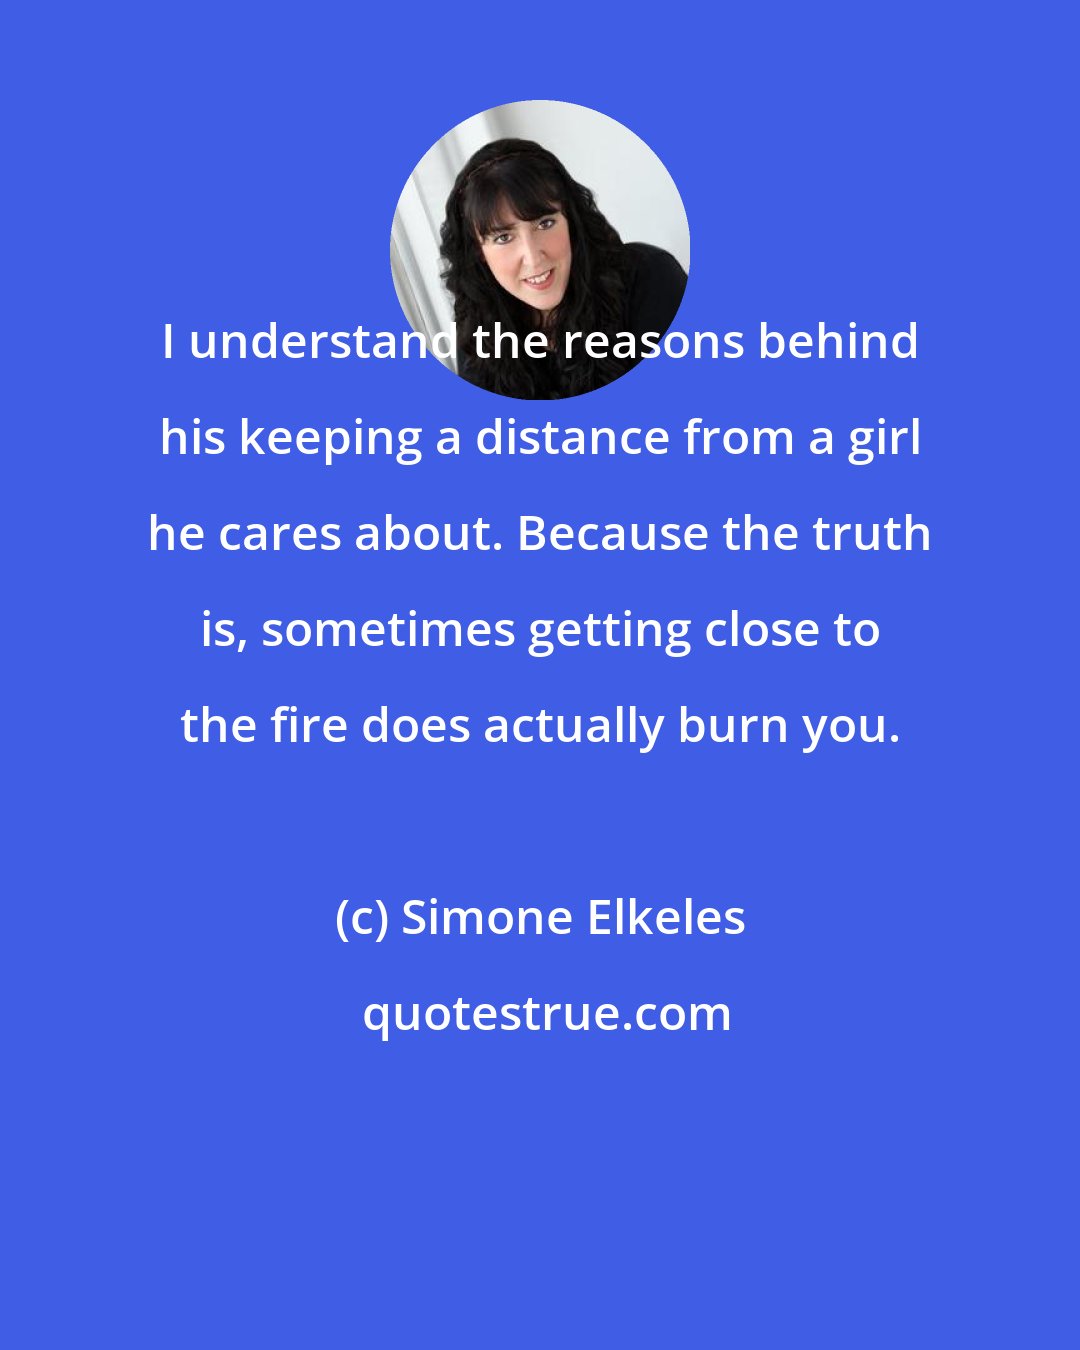 Simone Elkeles: I understand the reasons behind his keeping a distance from a girl he cares about. Because the truth is, sometimes getting close to the fire does actually burn you.